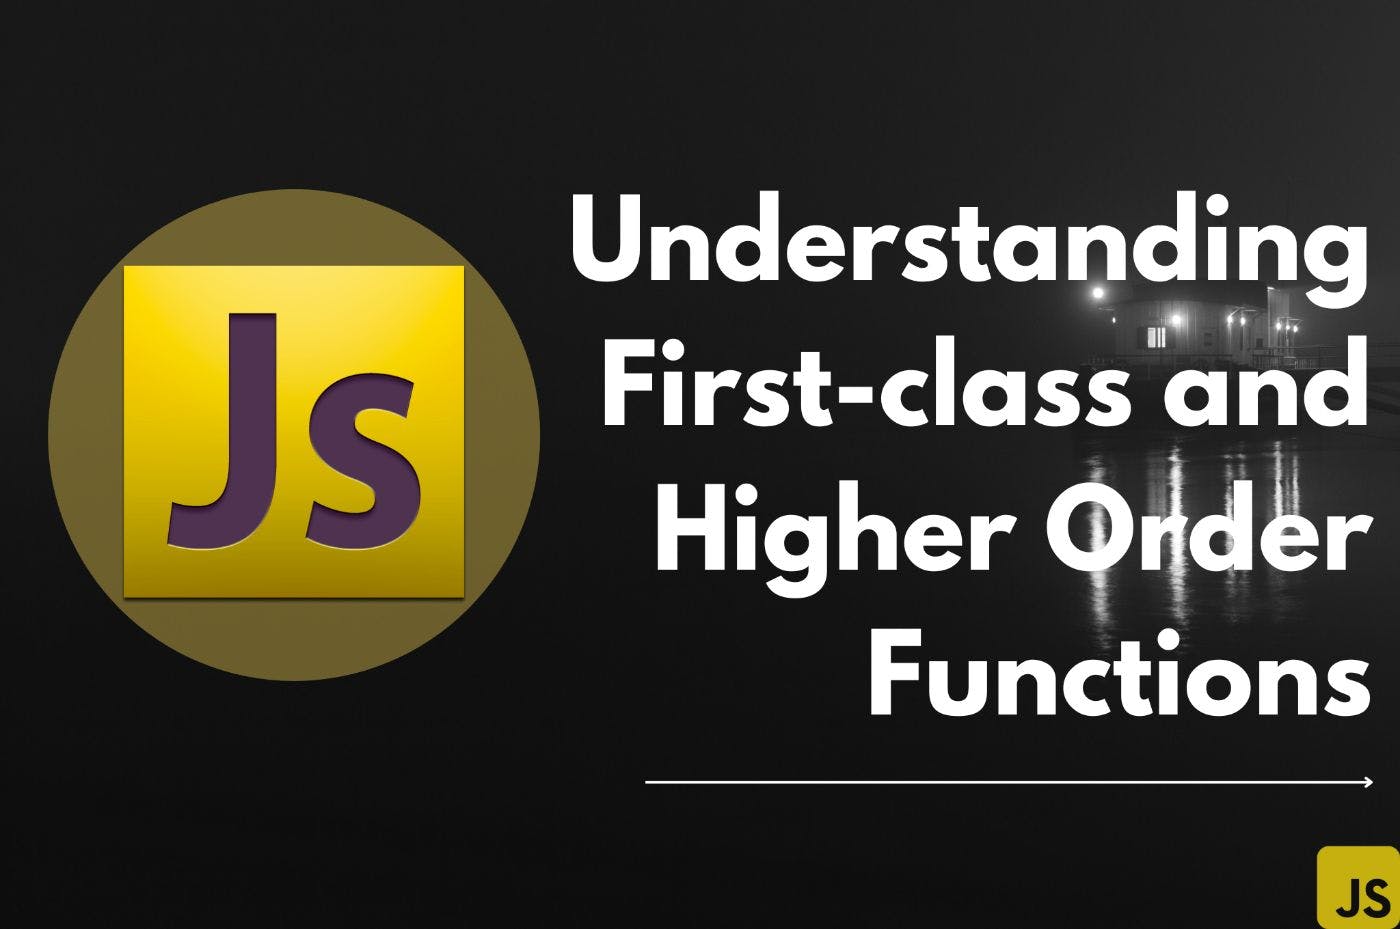 featured image - Understanding First-class and Higher Order Functions